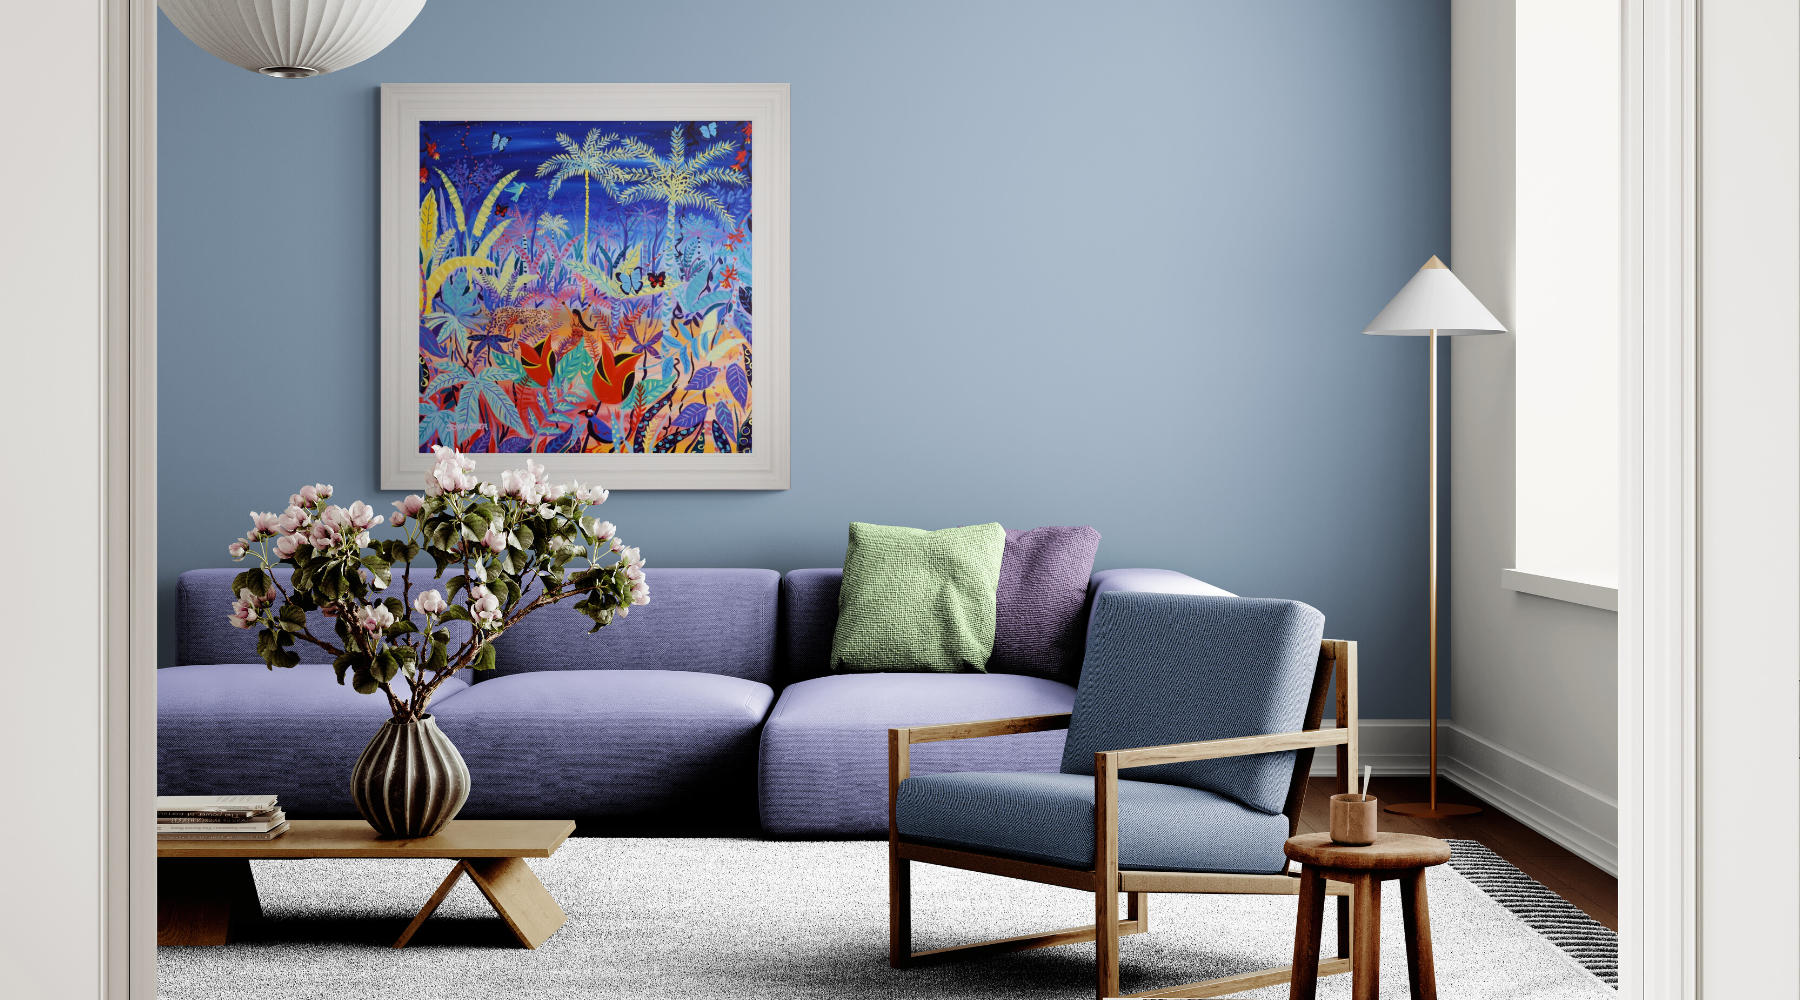 Discover the Best Places to Buy an Art Painting Online: Original Works at Your Fingertips